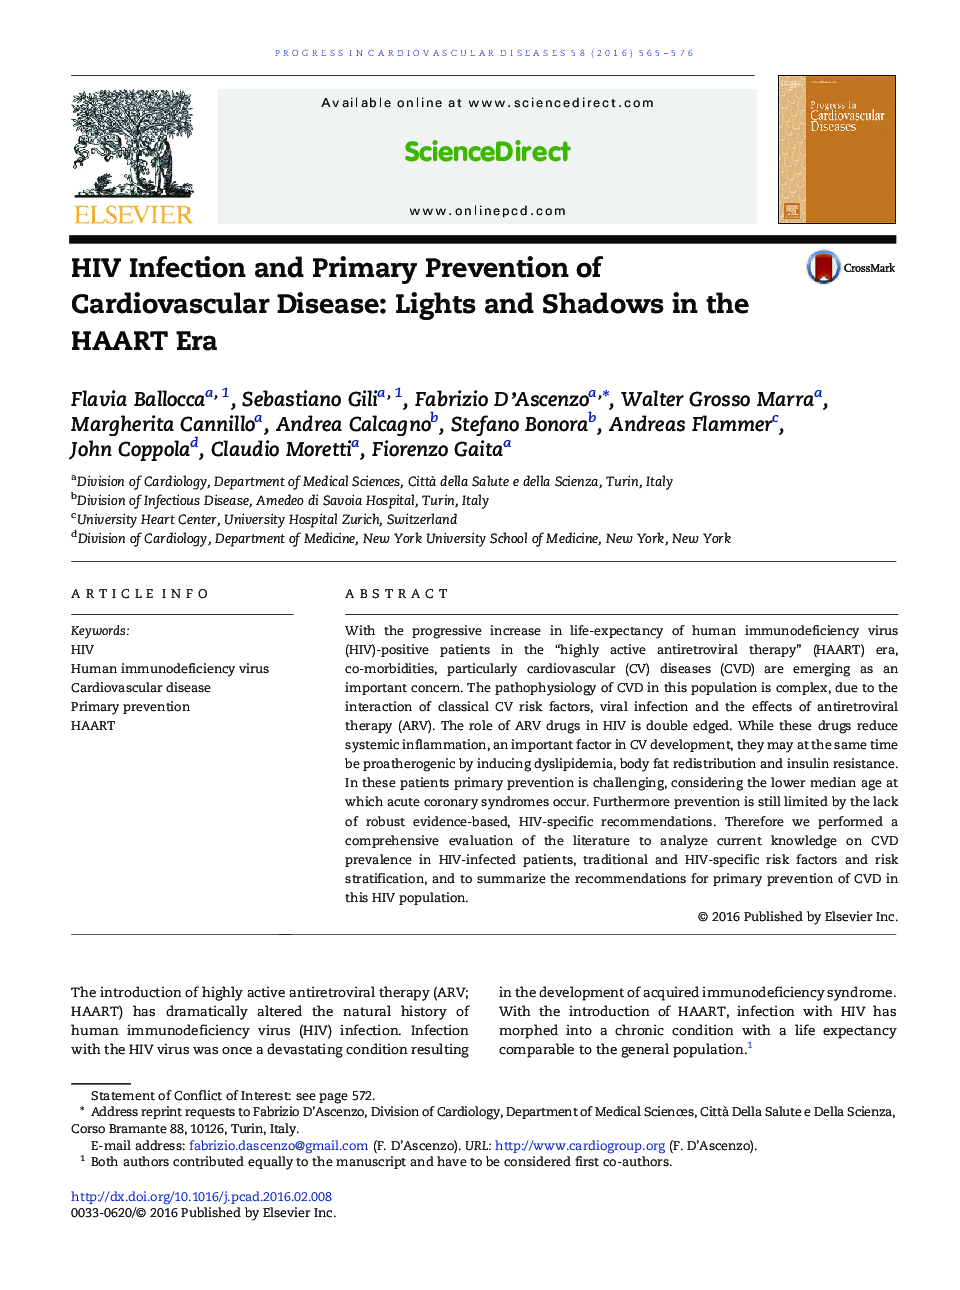 HIV Infection and Primary Prevention of Cardiovascular Disease: Lights and Shadows in the HAART Era 